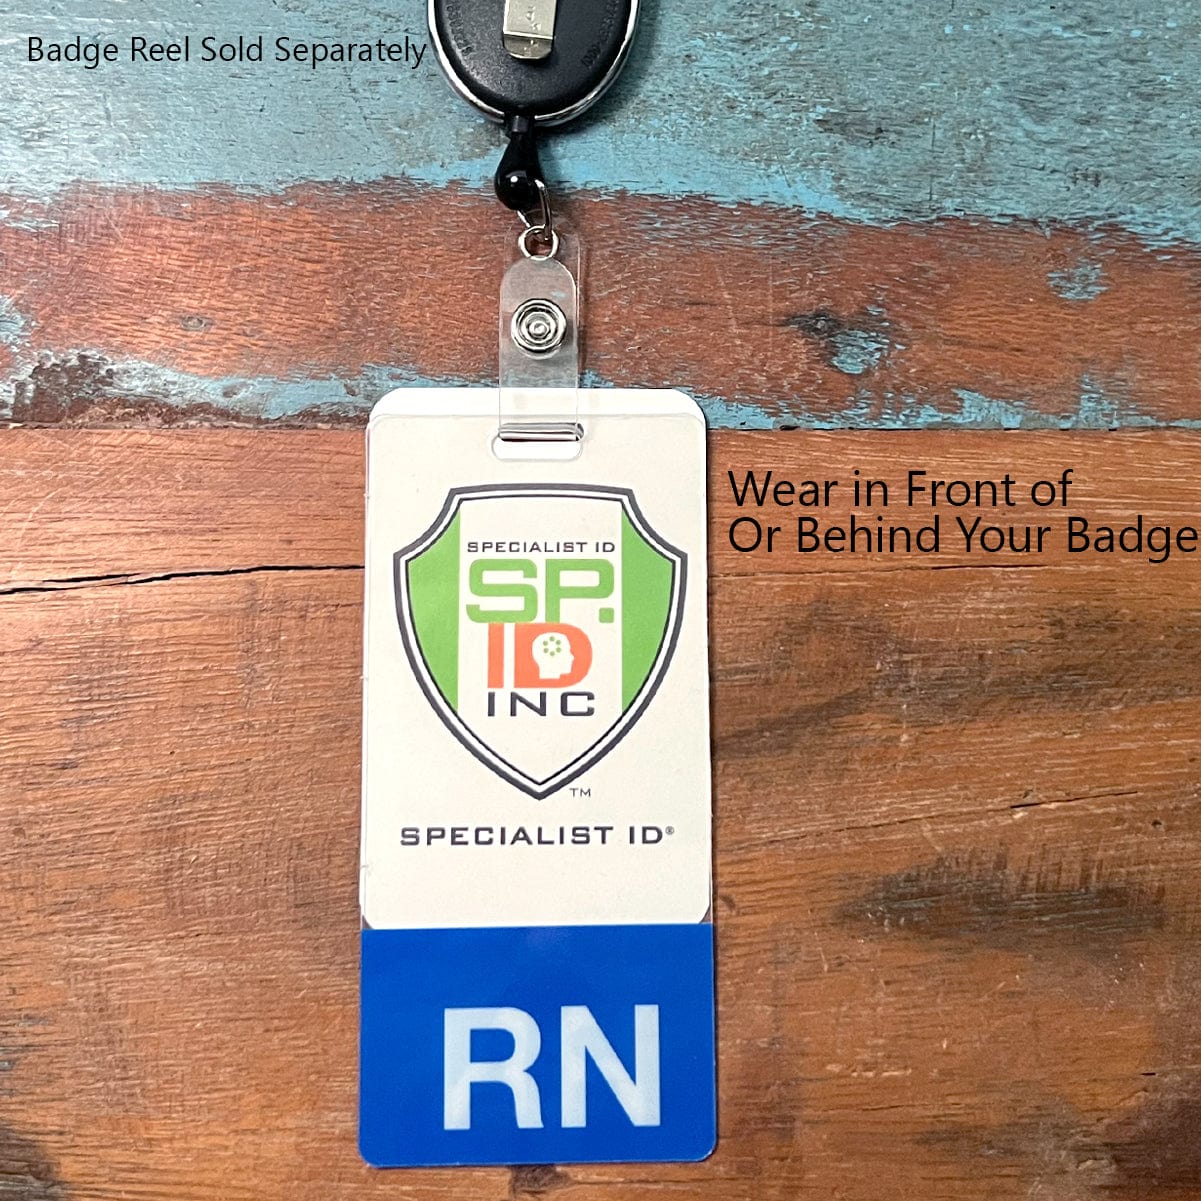 Clear Rn Badge Buddy Vertical with Color Border for Registered Nurses - Double Sided Print